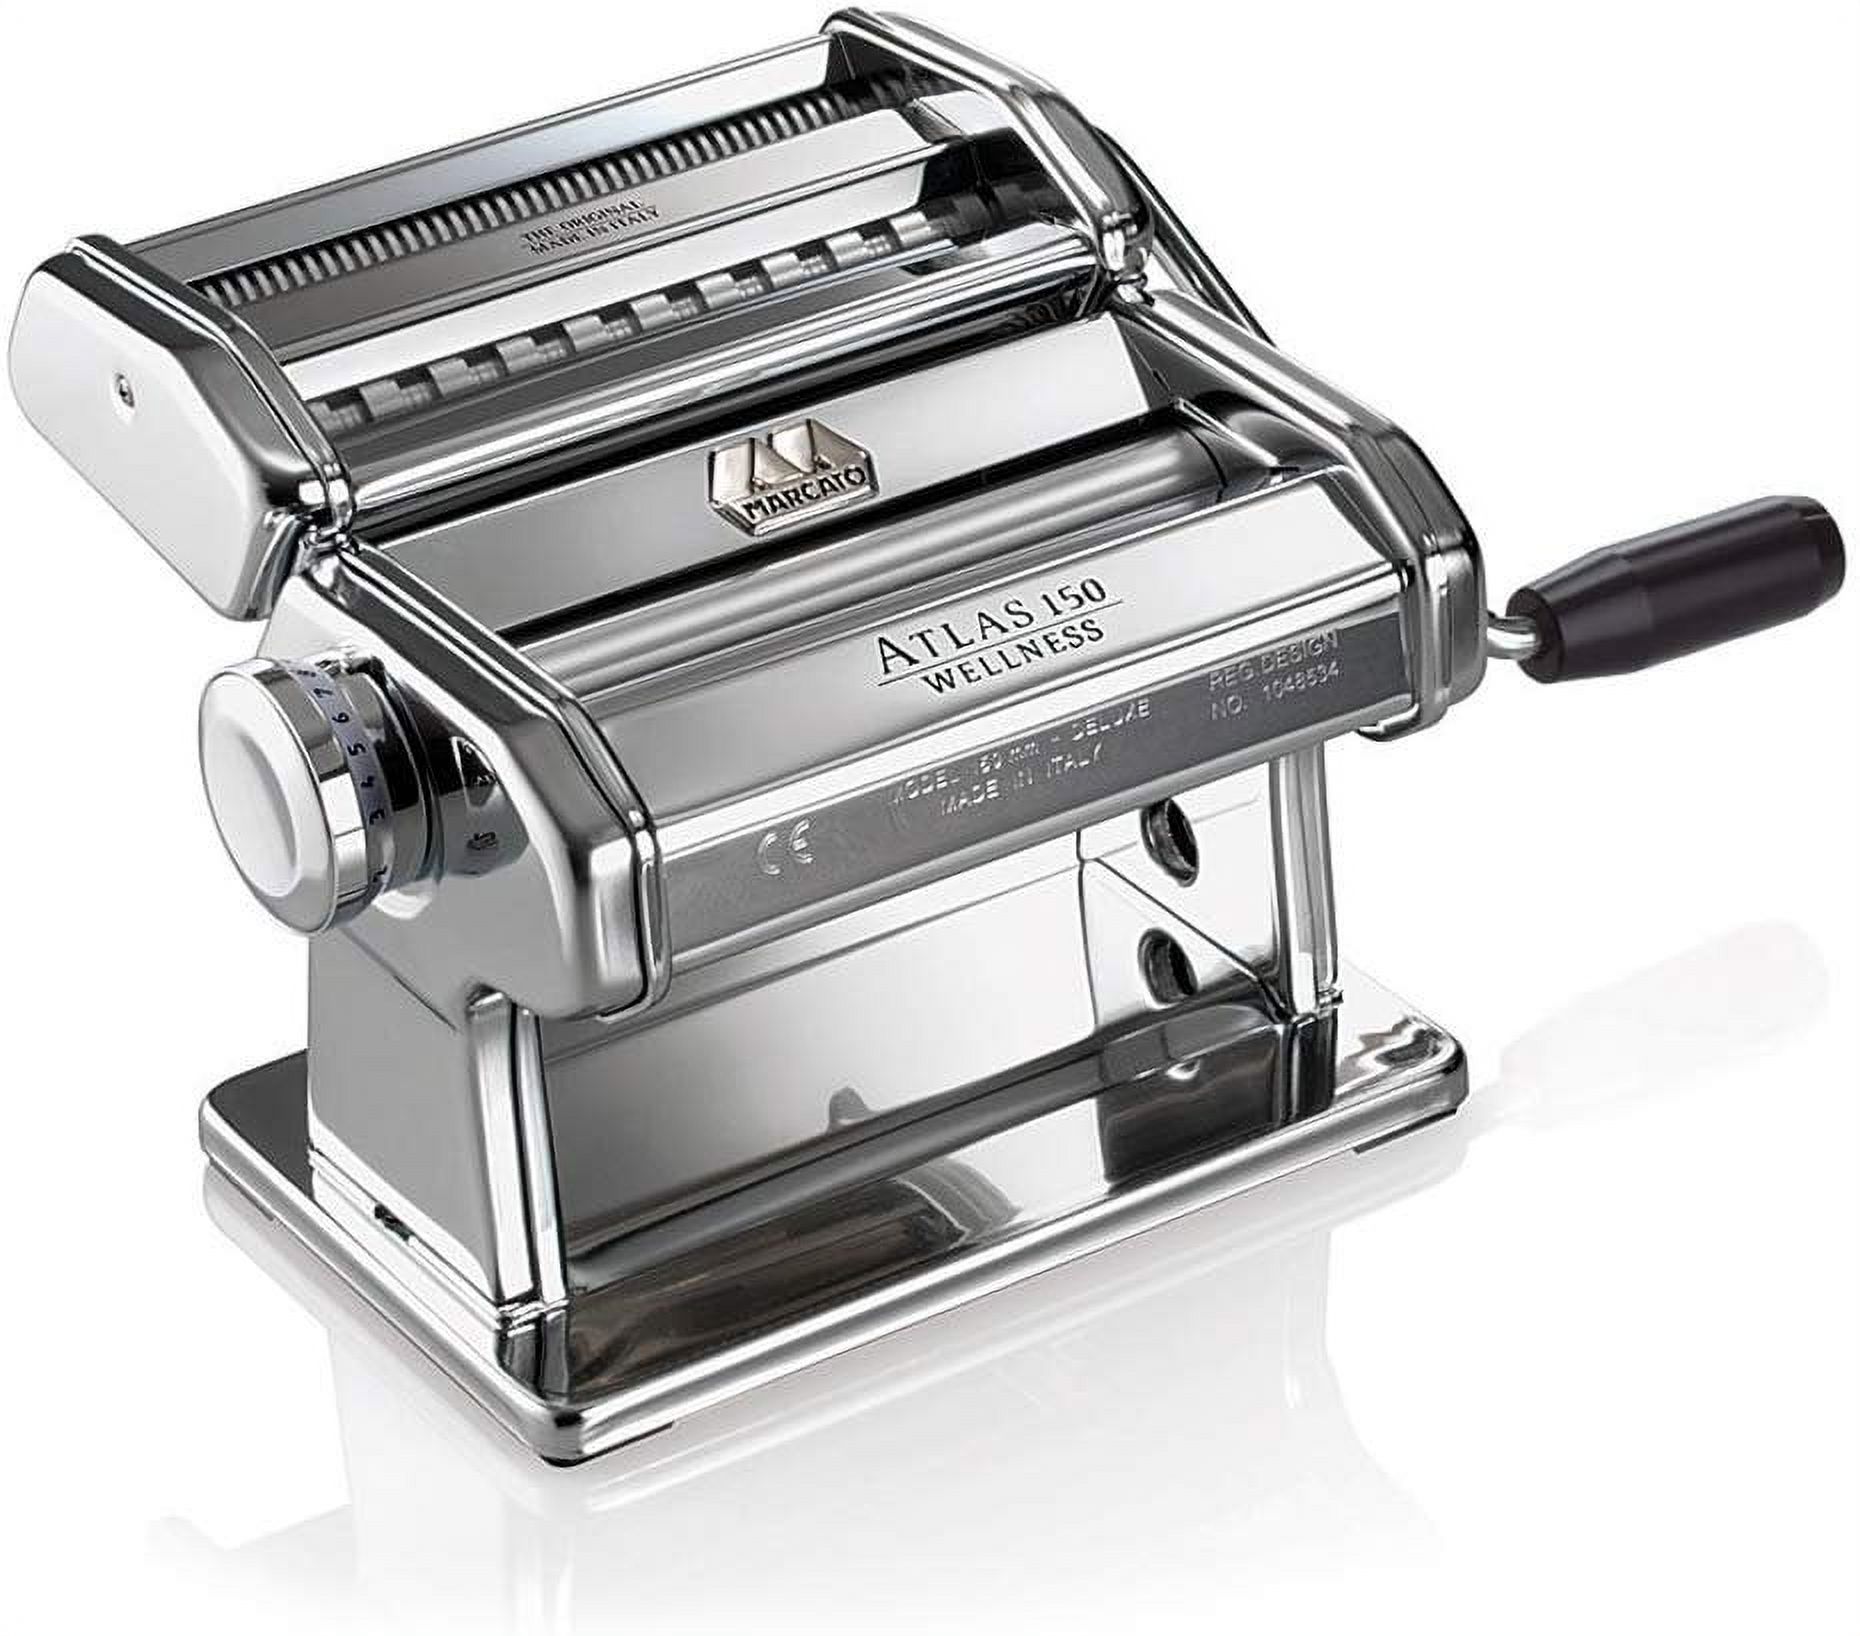 Atlas Marcato Made in Italy Stainless Silver Black 150mm Wide Pasta Machine 8320 - image 1 of 13